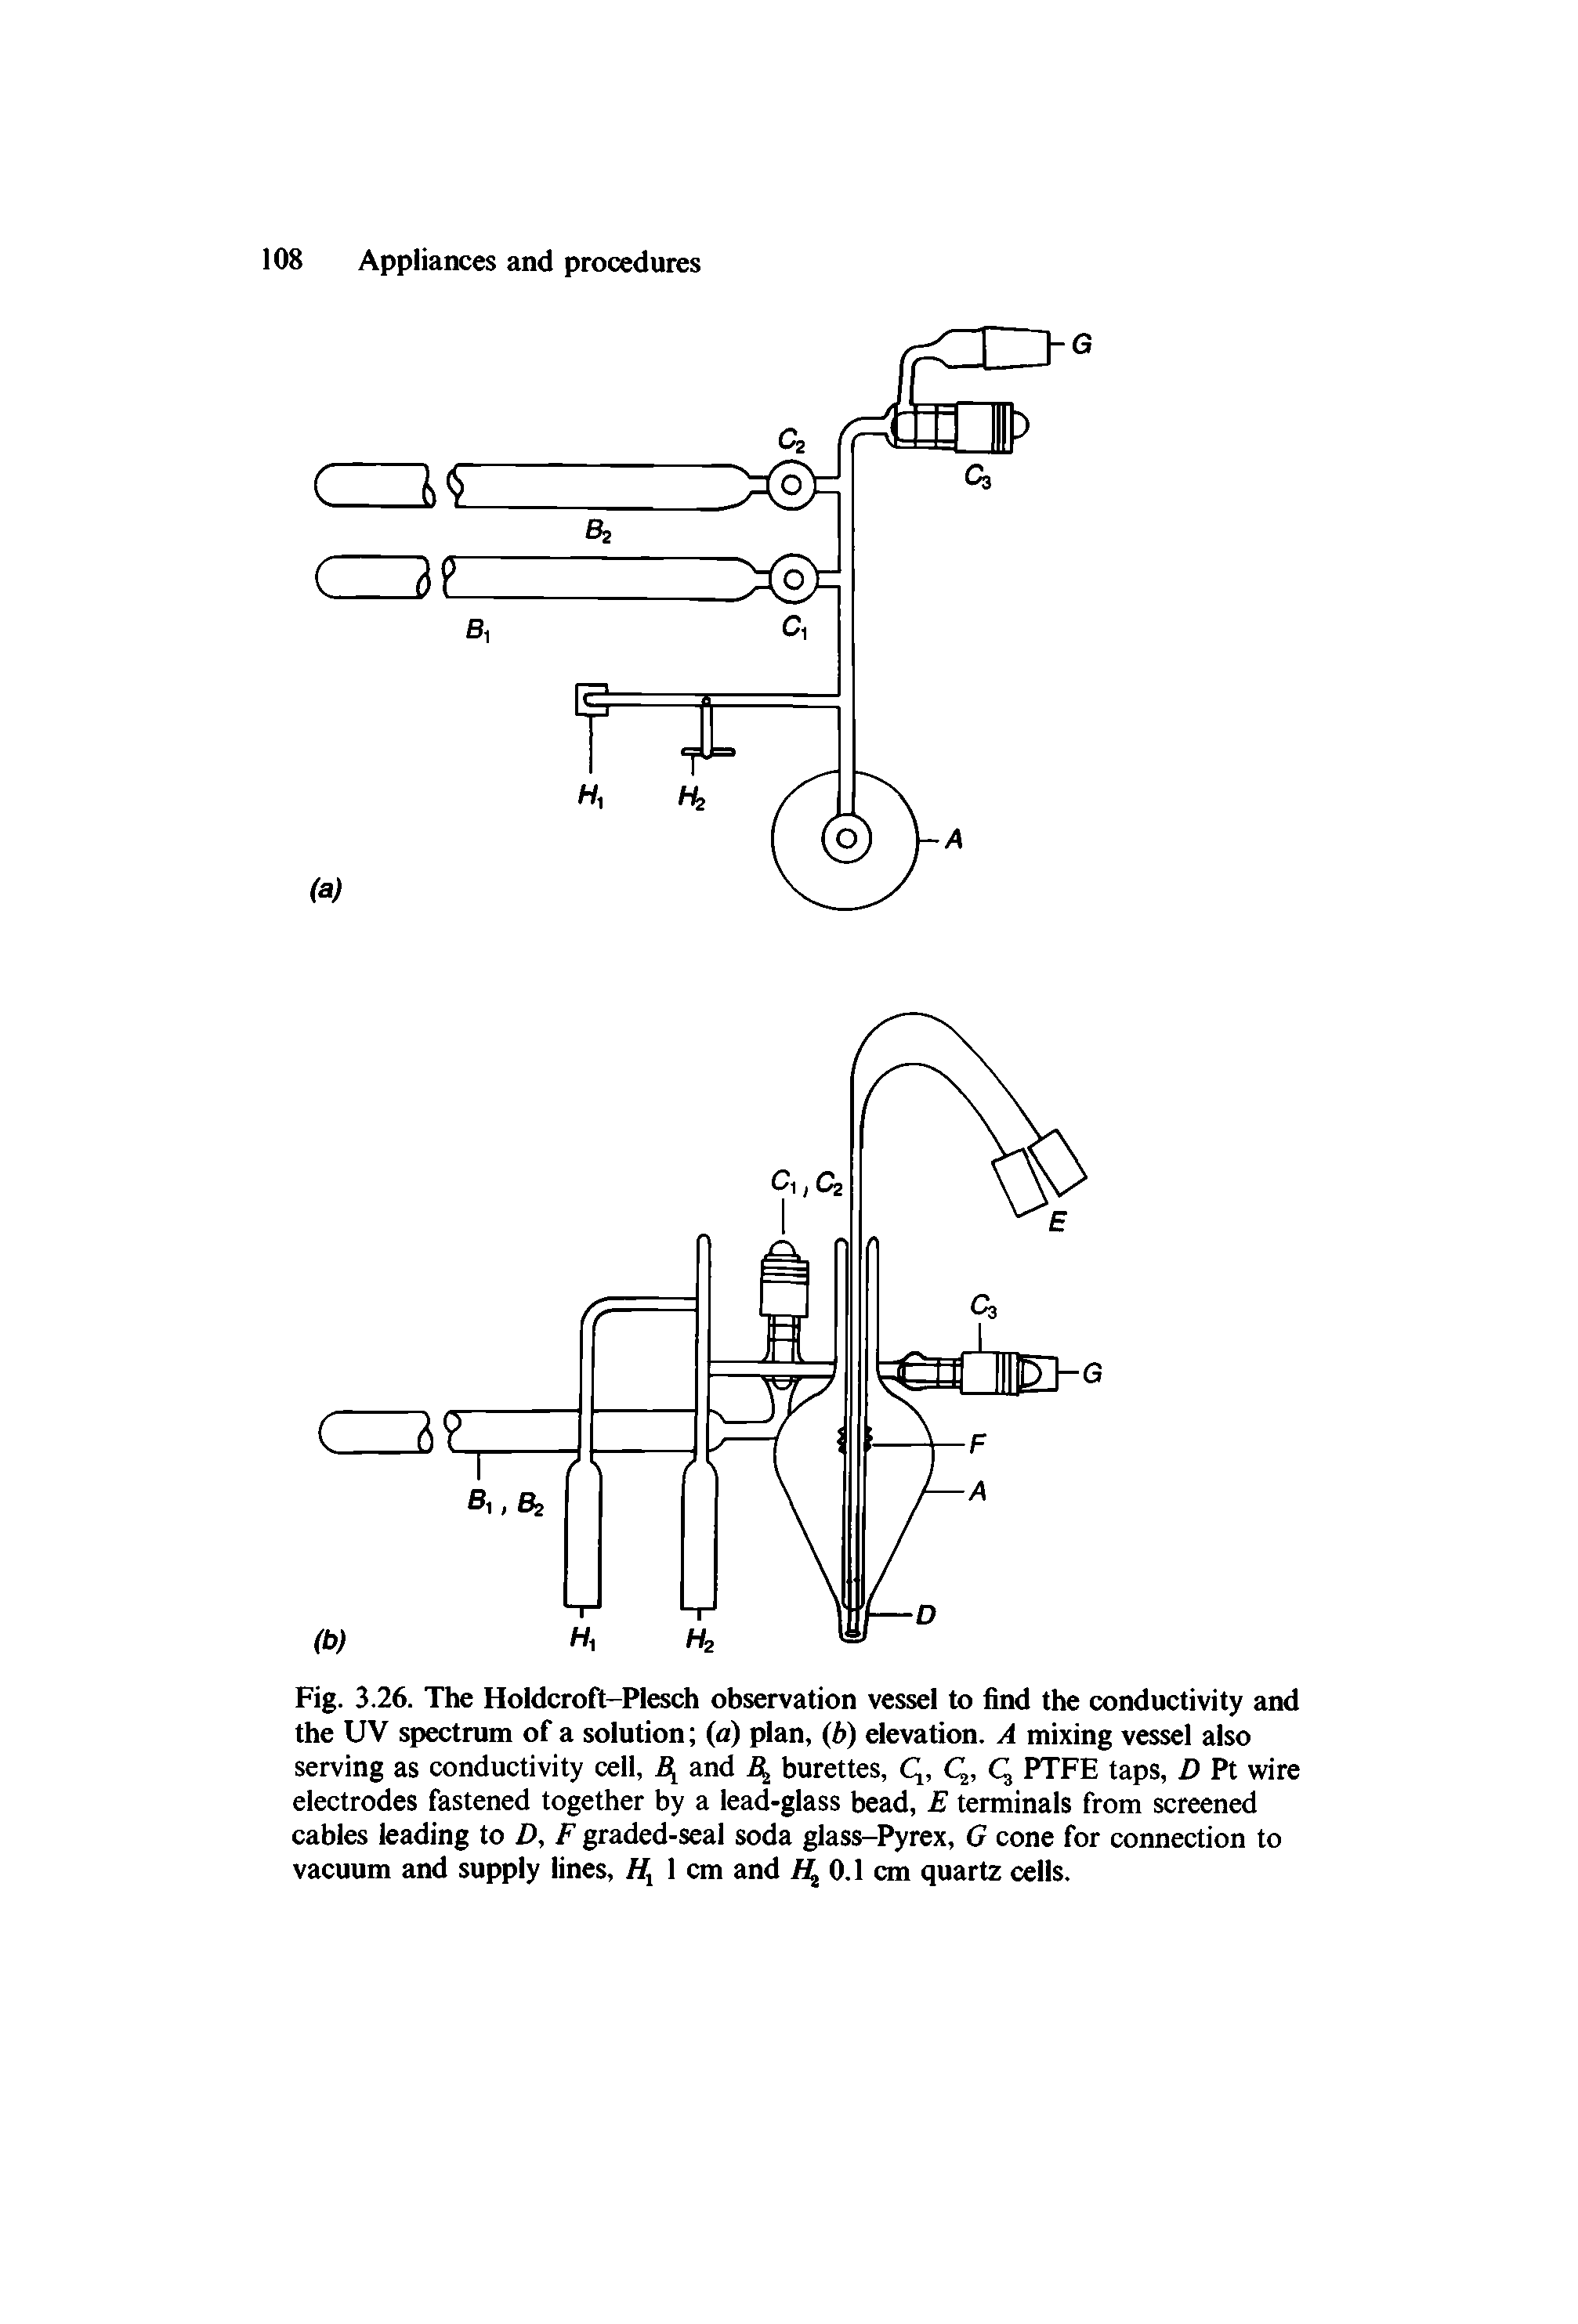 Fig. 3.26. The Holdcroft-Plesch observation vessel to find the conductivity and the UV spectrum of a solution (a) plan, (b) elevation. A mixing vessel also serving as conductivity cell, and burettes, Q, Q, Q PTFE taps, D Pt wire electrodes fastened together by a lead-glass bead, E terminals from screened cables leading to D, F graded-seal soda glass-Pyrex, G cone for connection to vacuum and supply lines, 1 cm and 0.1 cm quartz cells.